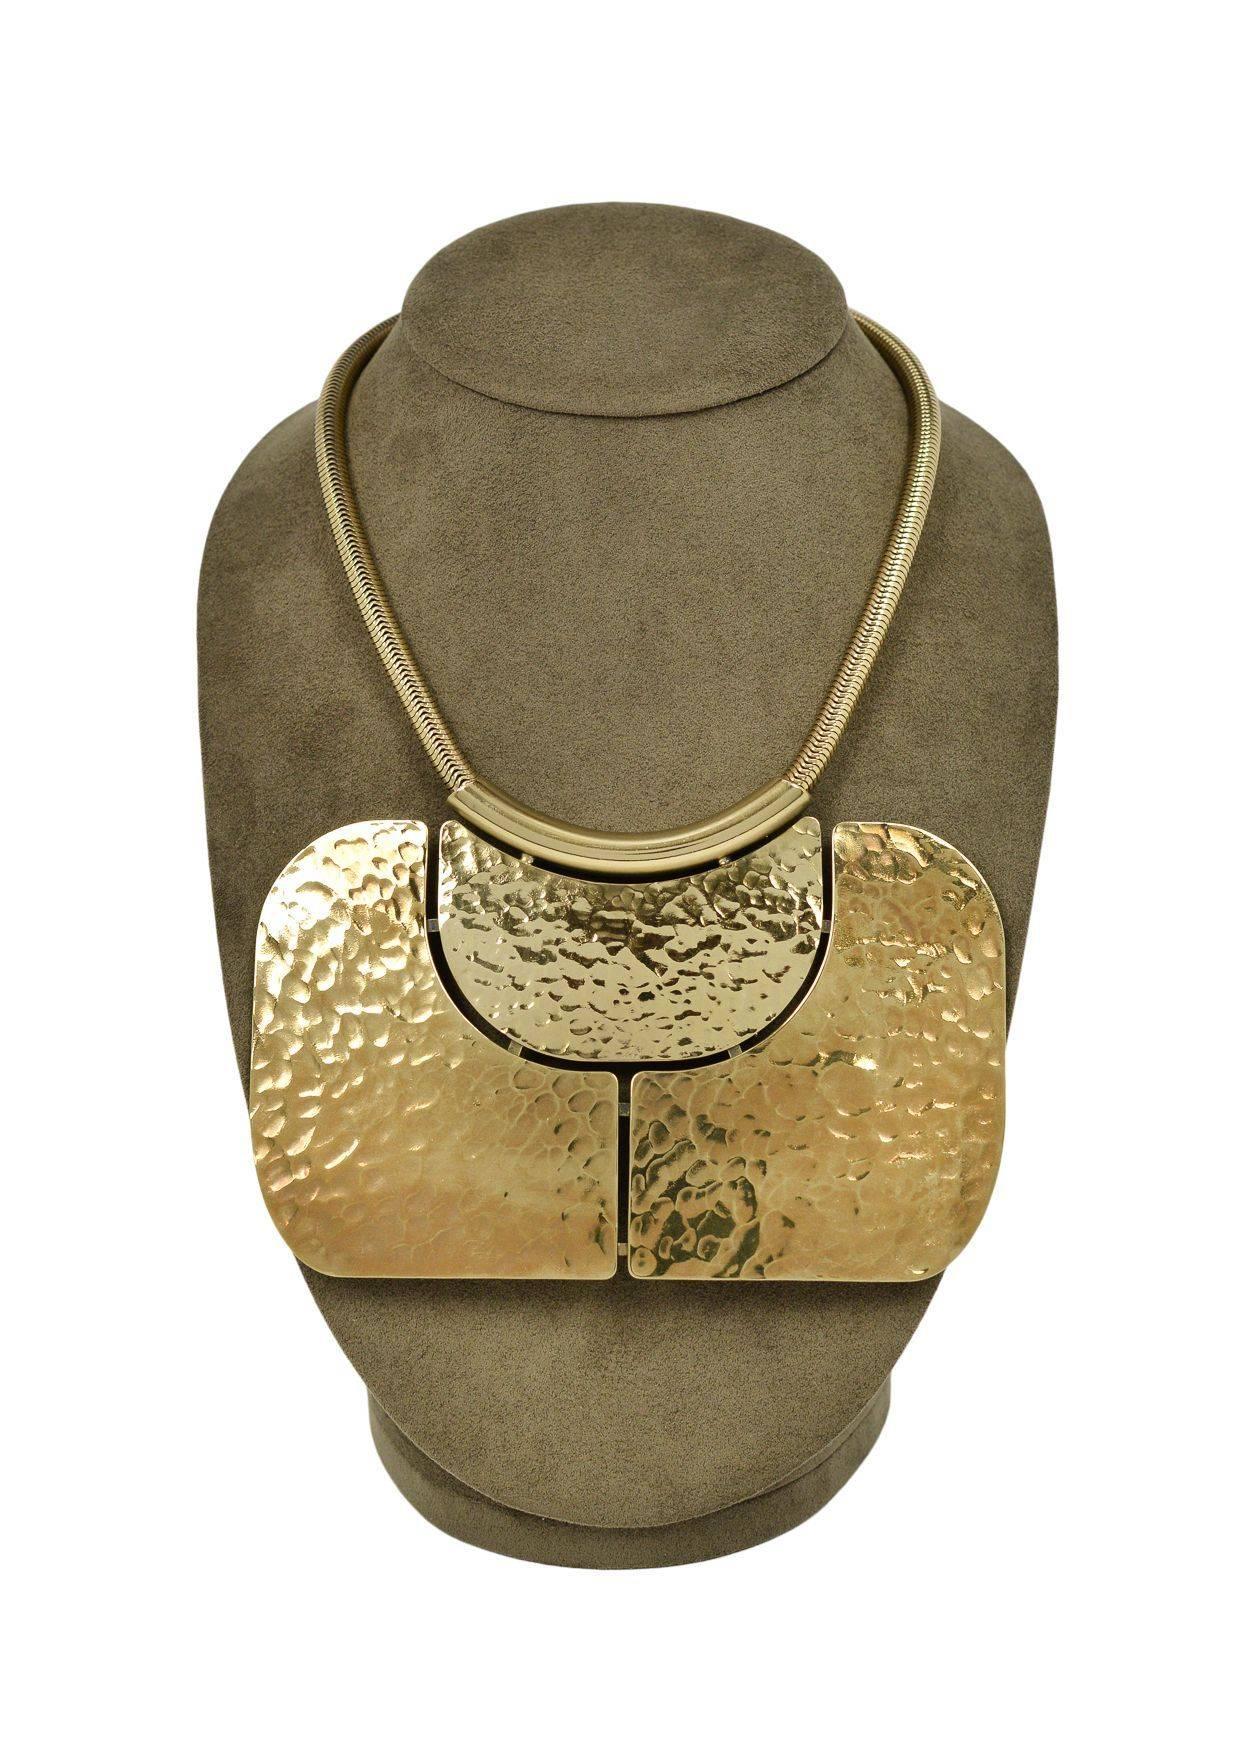 Lanvin by Alber Elbaz brass tone hammered modernist metal bib necklace with coil chain.